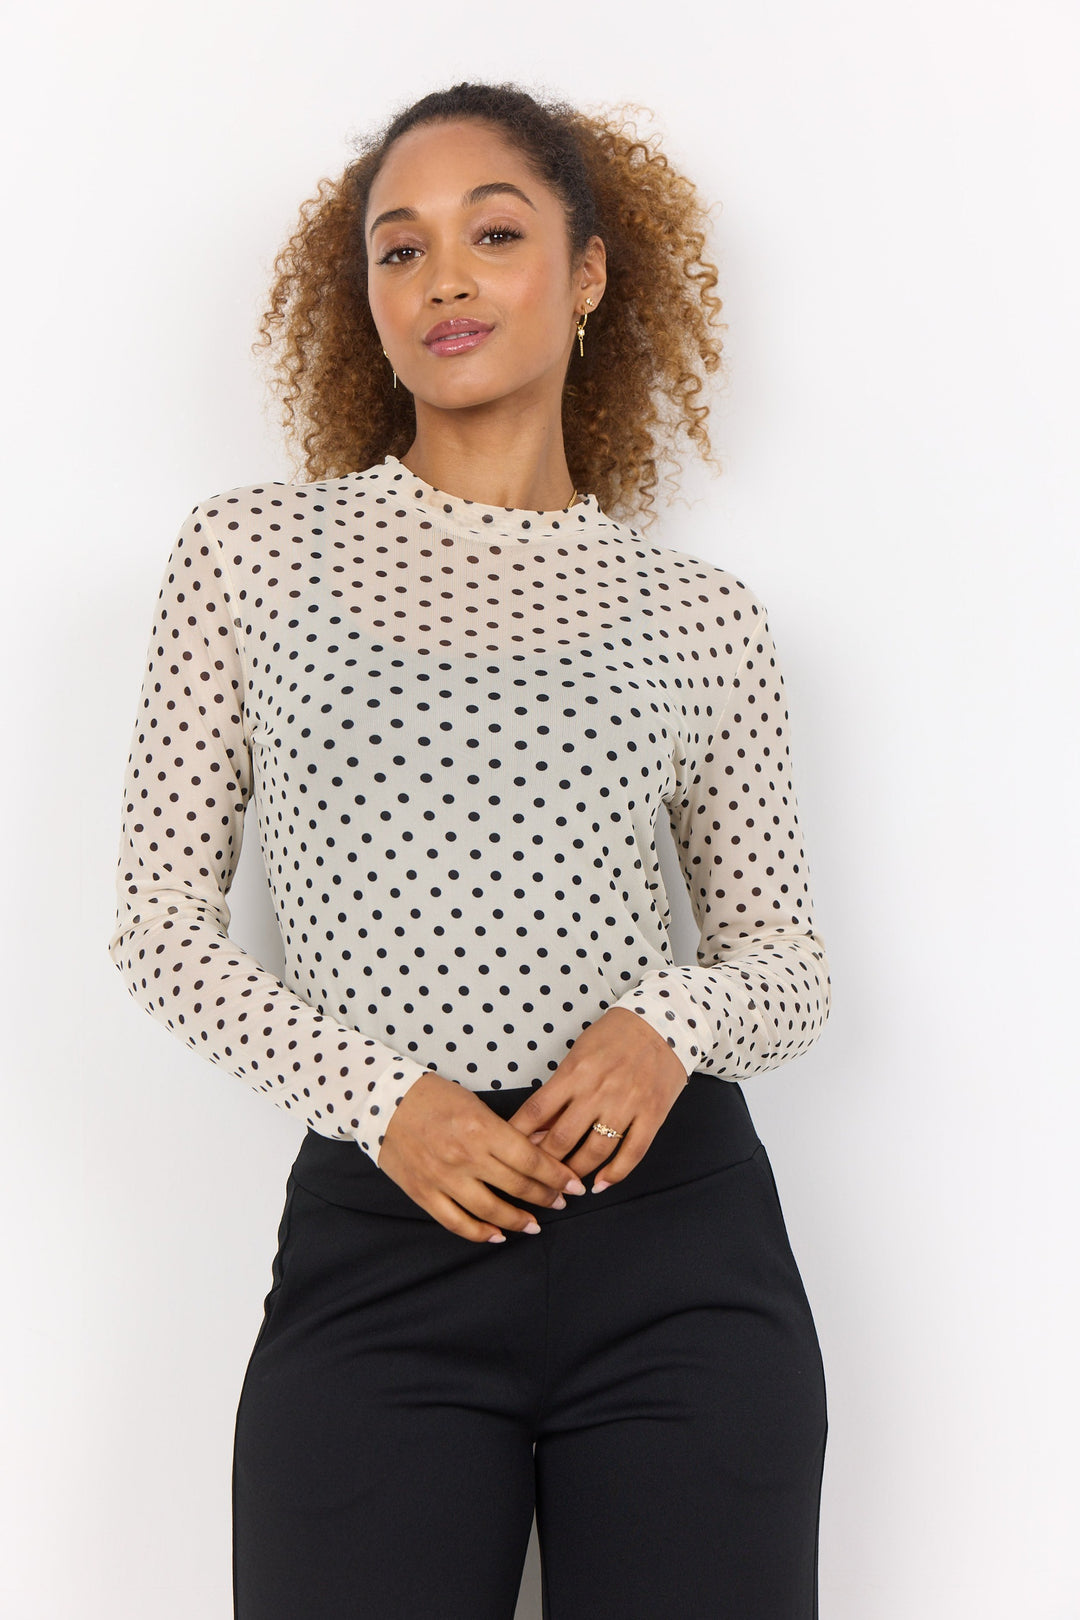 Soya Concept Fall 2024 Made from neat mesh fabric, this top features a lively polka dot pattern and a high neck design with long sleeves.